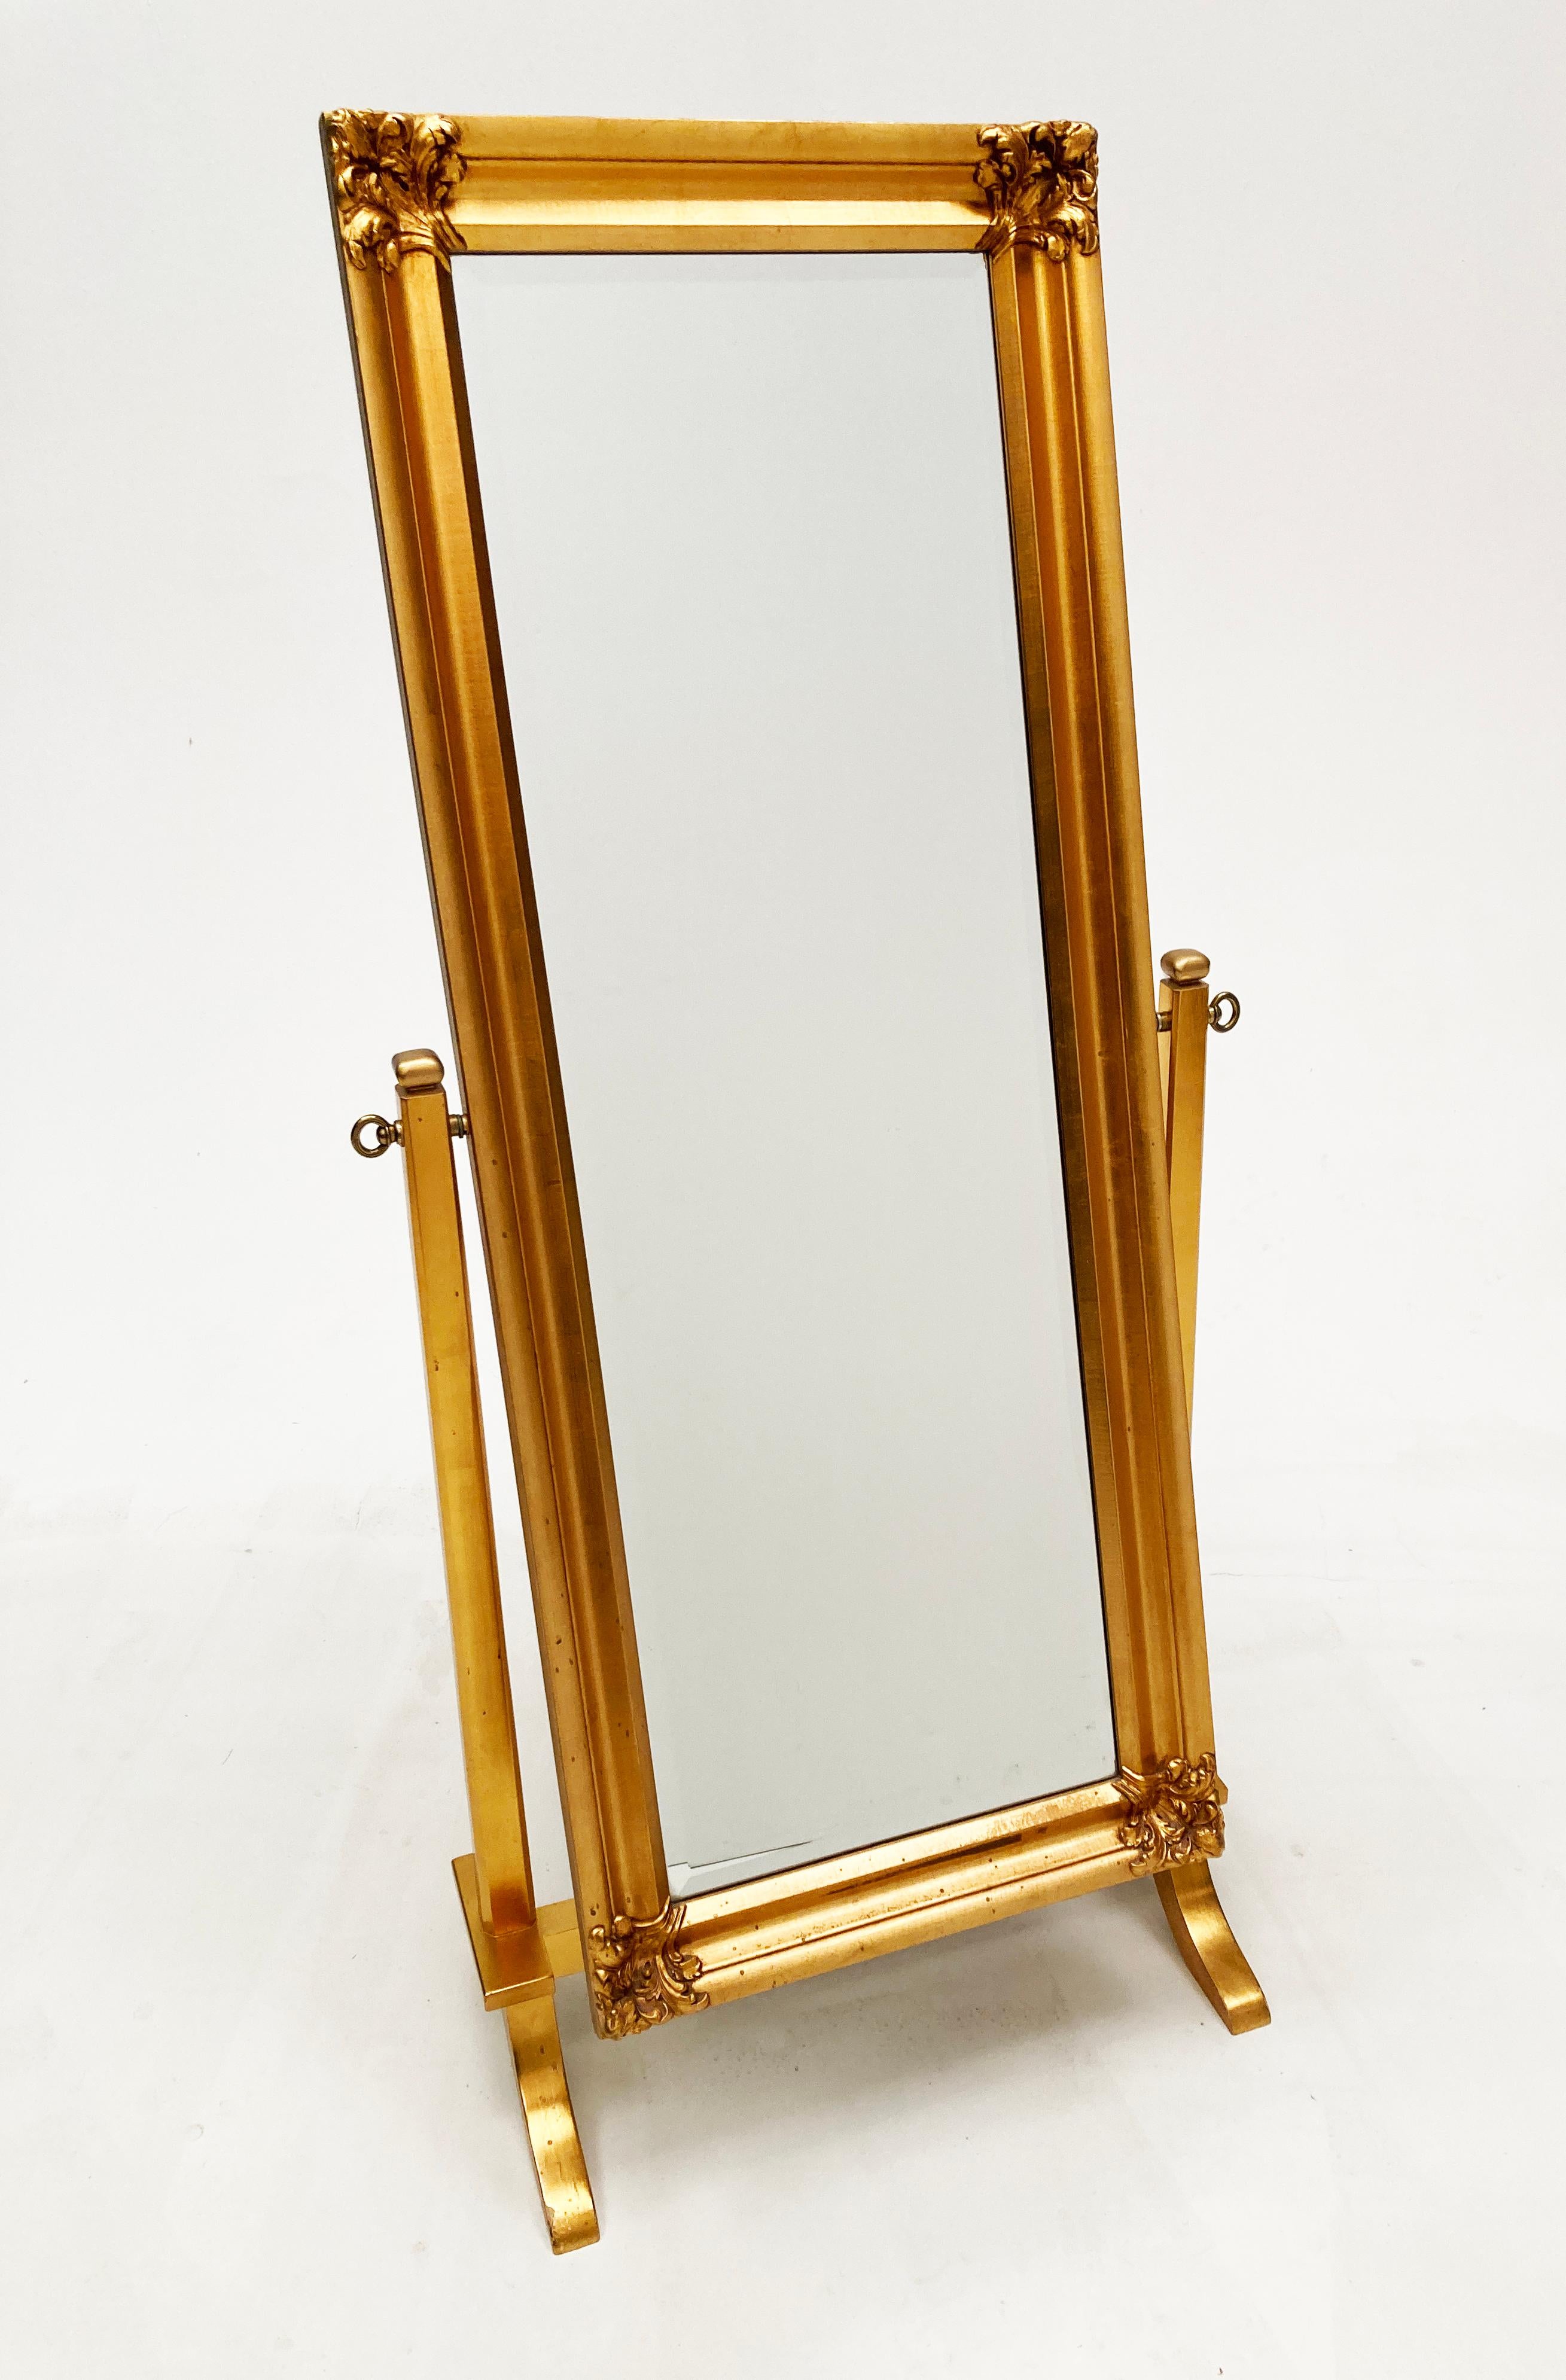 Fabulous gilt wood cheval mirror infuses a French vibe with a touch of Hollywood Regency. Custom crafted, this beveled glass mirror sits on a four-leg cradle base. The framework of the mirror is simple, yet showcases ornate flora corner molding that